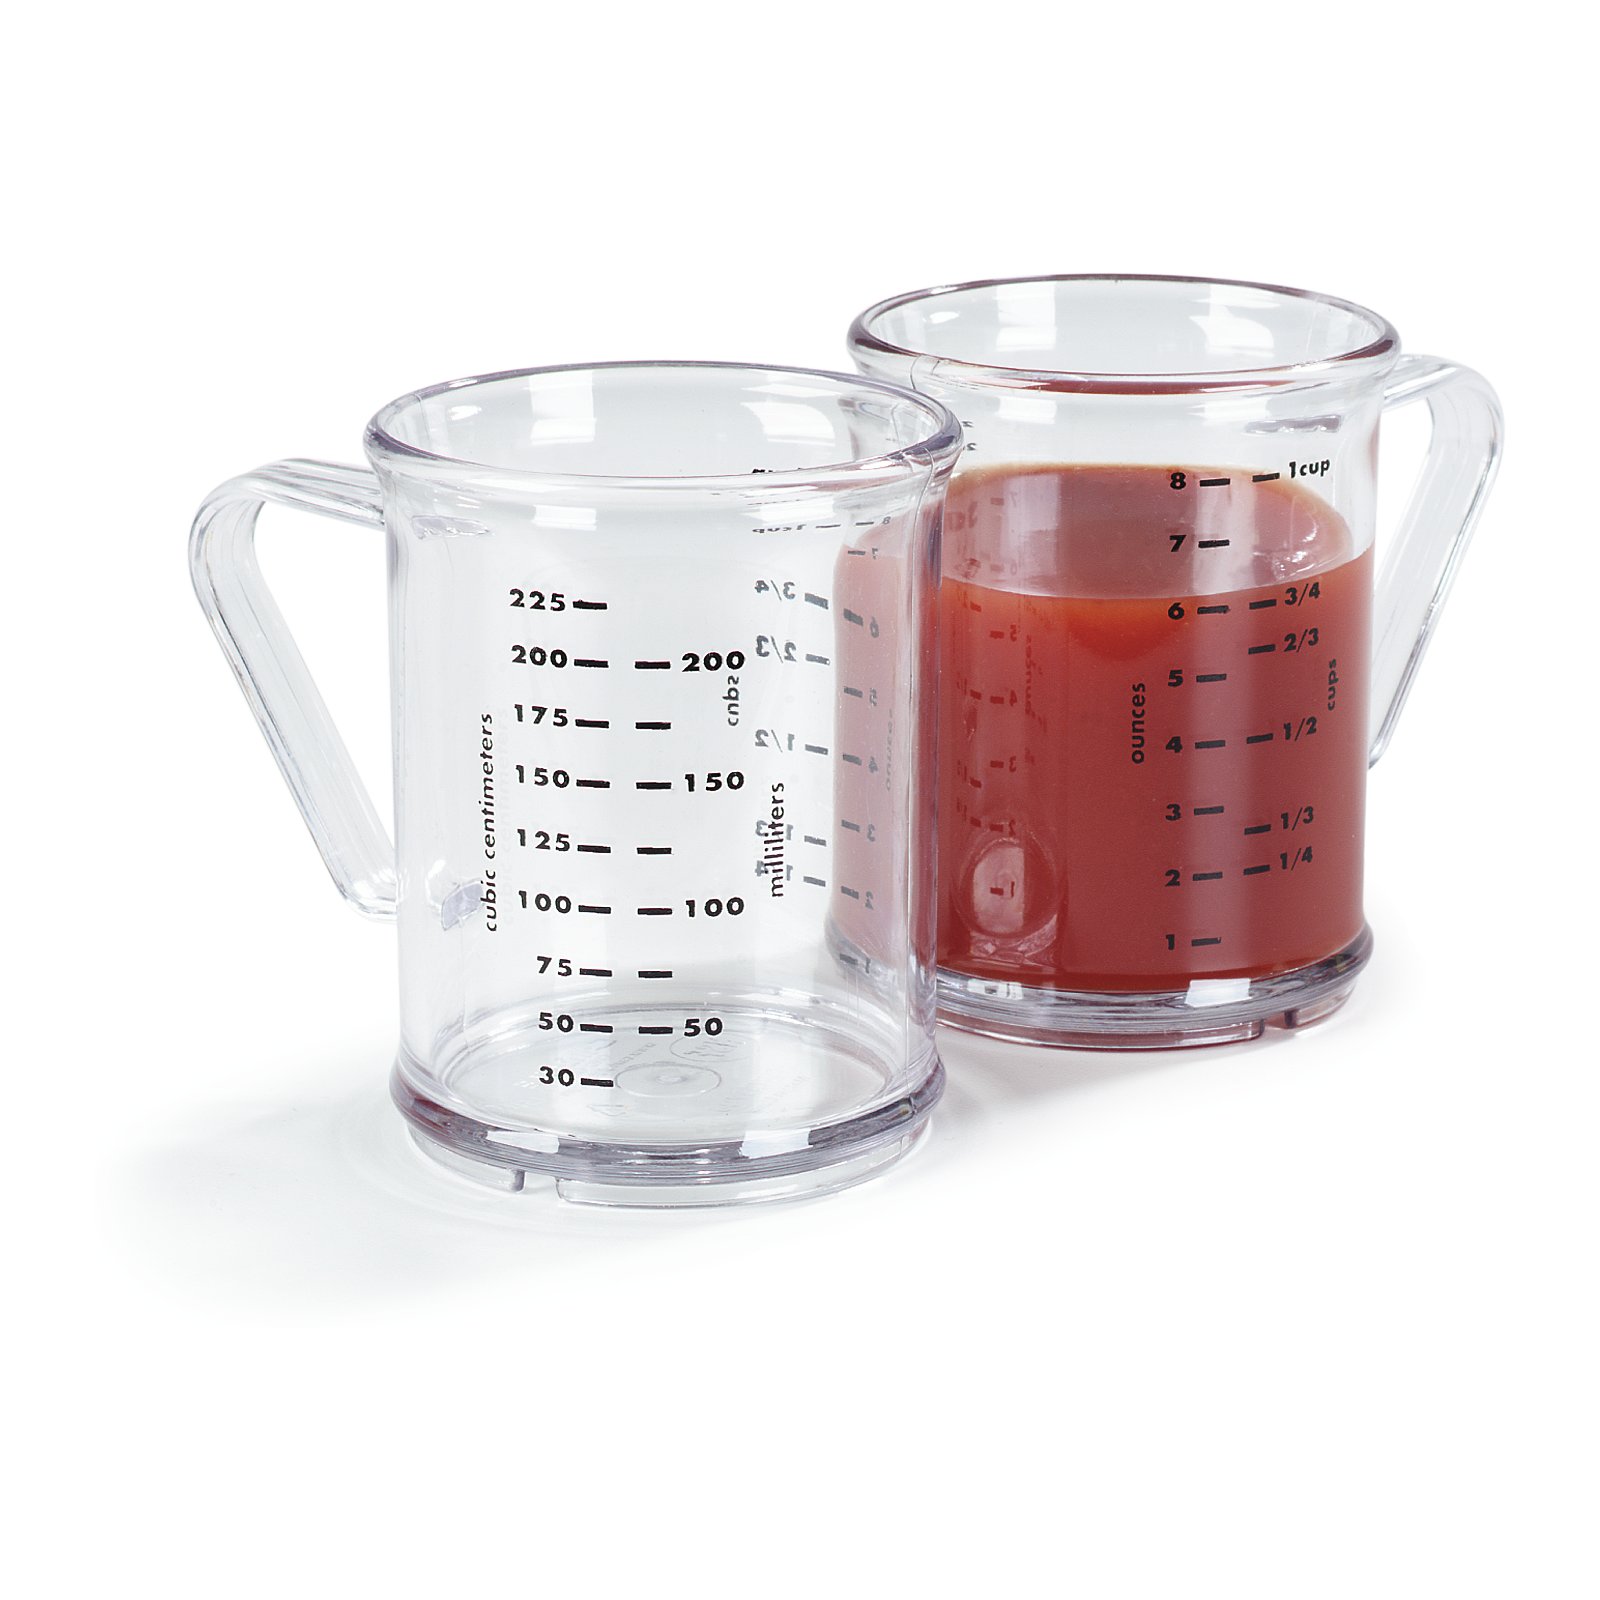 Each one of these measuring cups is filled with one of our